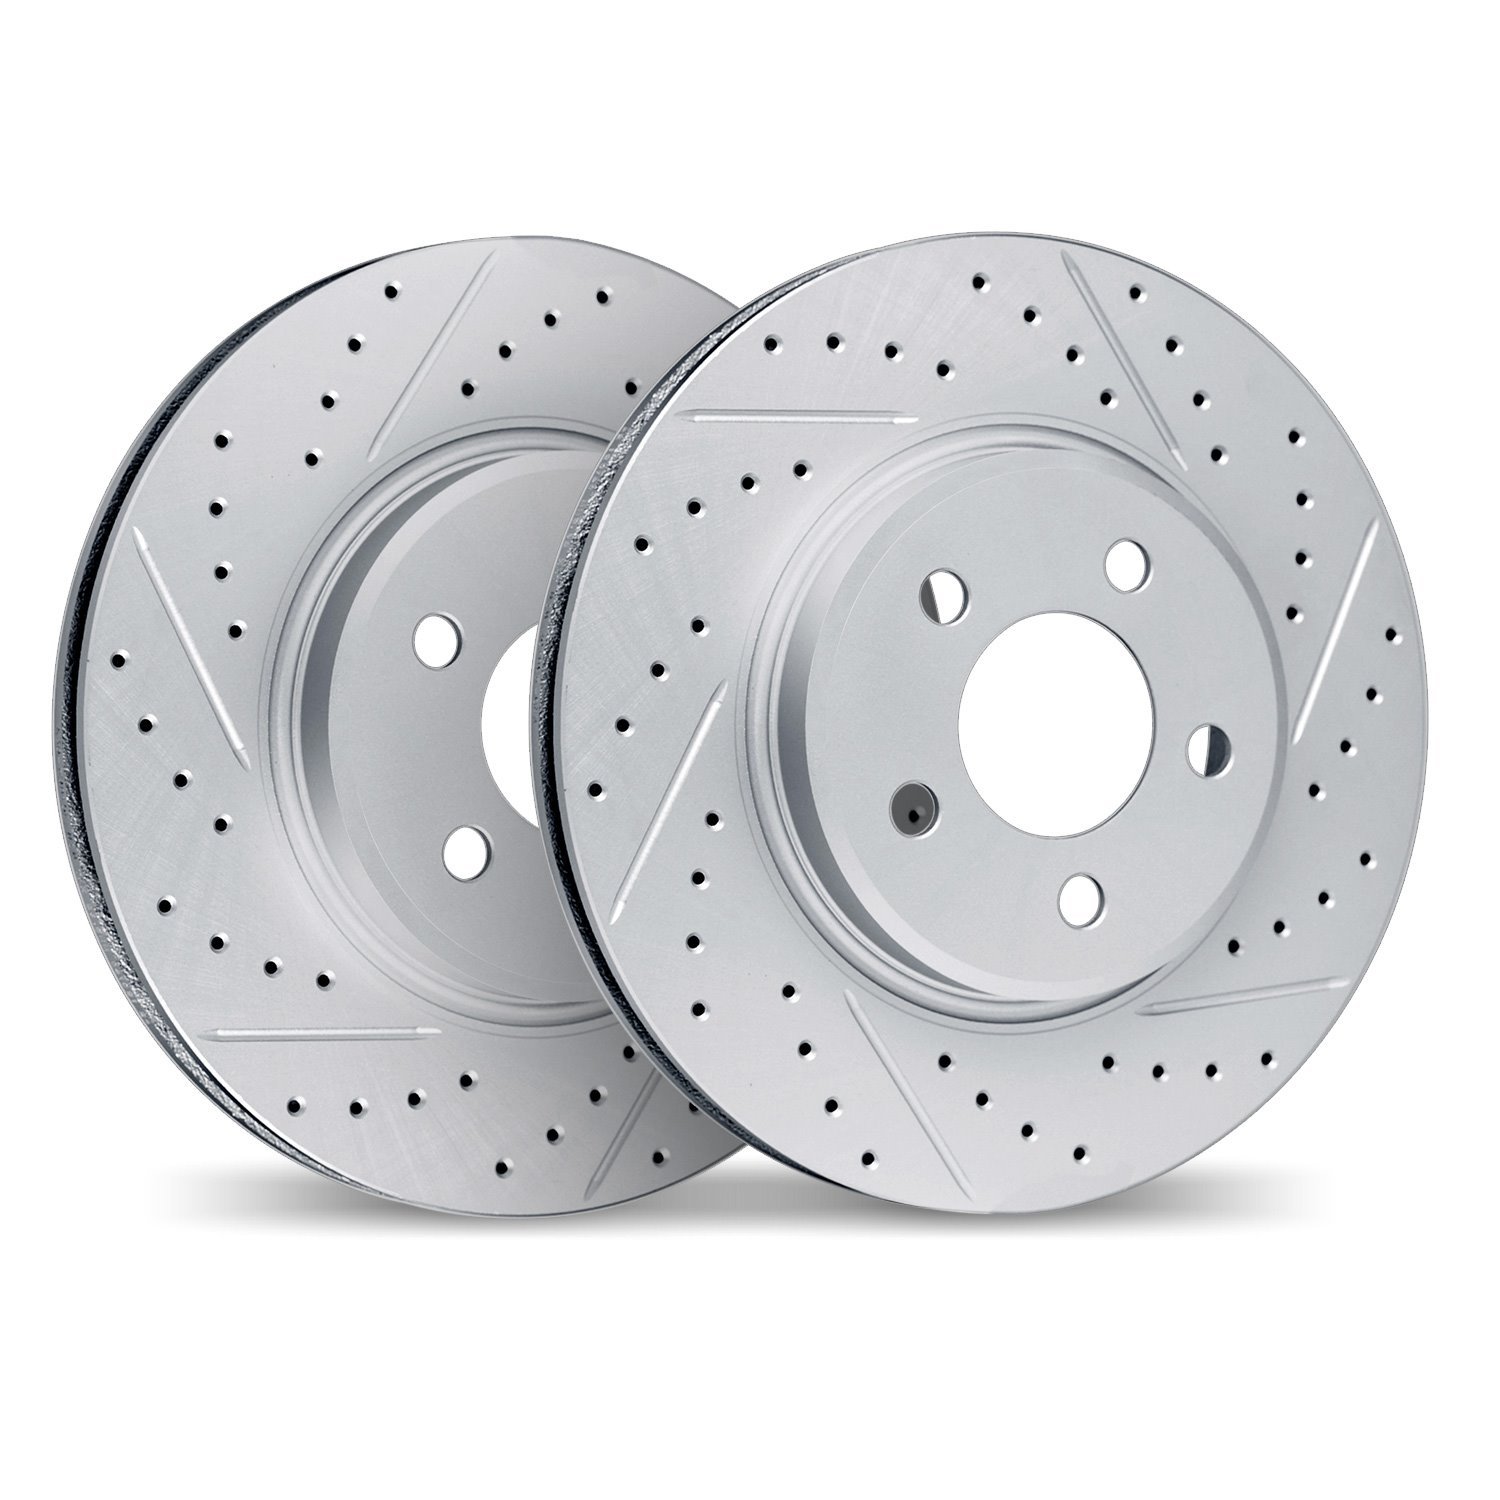 2002-76028 Geoperformance Drilled/Slotted Brake Rotors, 1984-1995 Lexus/Toyota/Scion, Position: Front